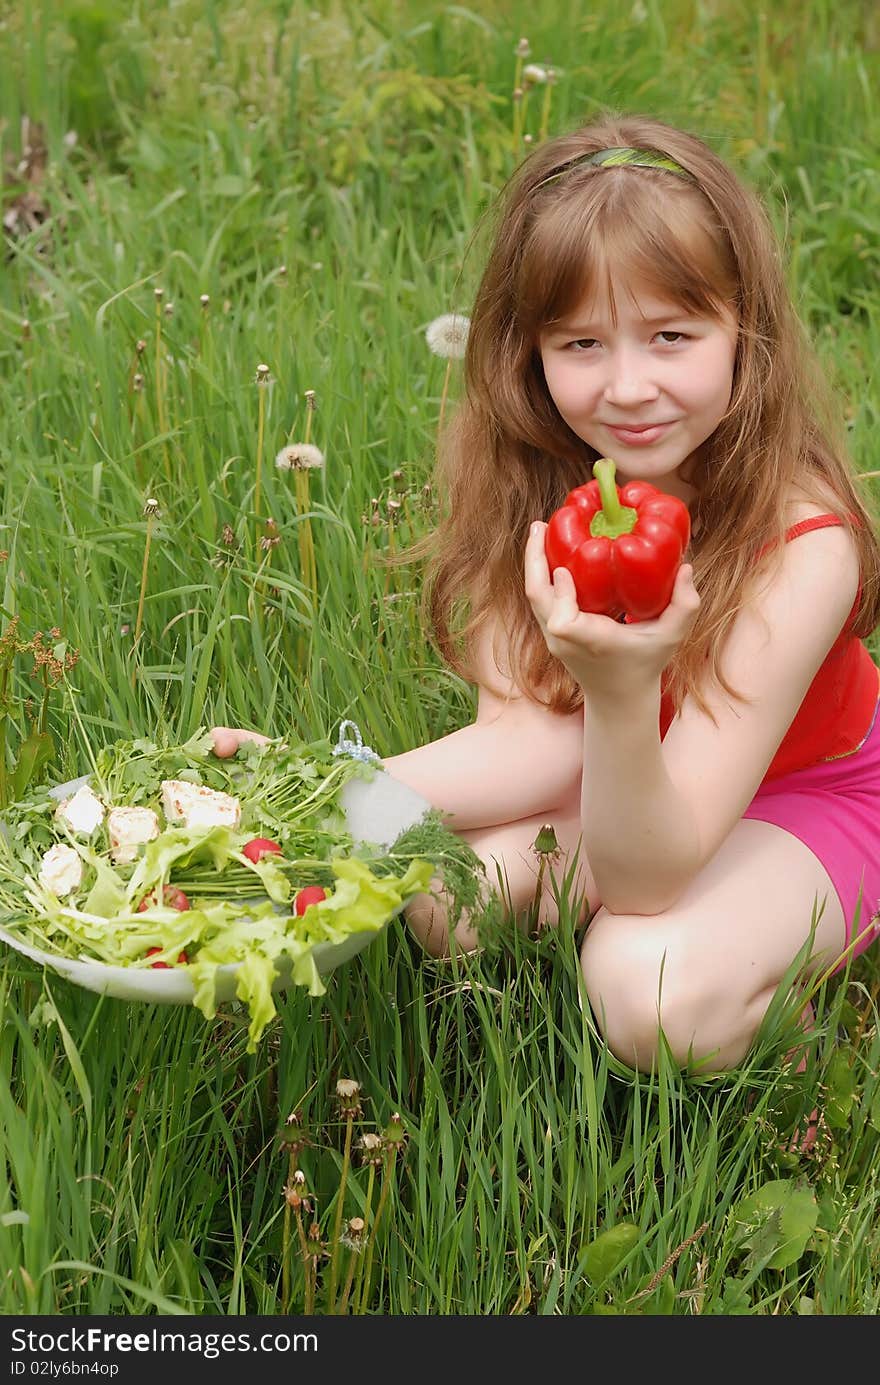 Portrait of the girl on a green grass with a dish of fresh vegetables. Portrait of the girl on a green grass with a dish of fresh vegetables